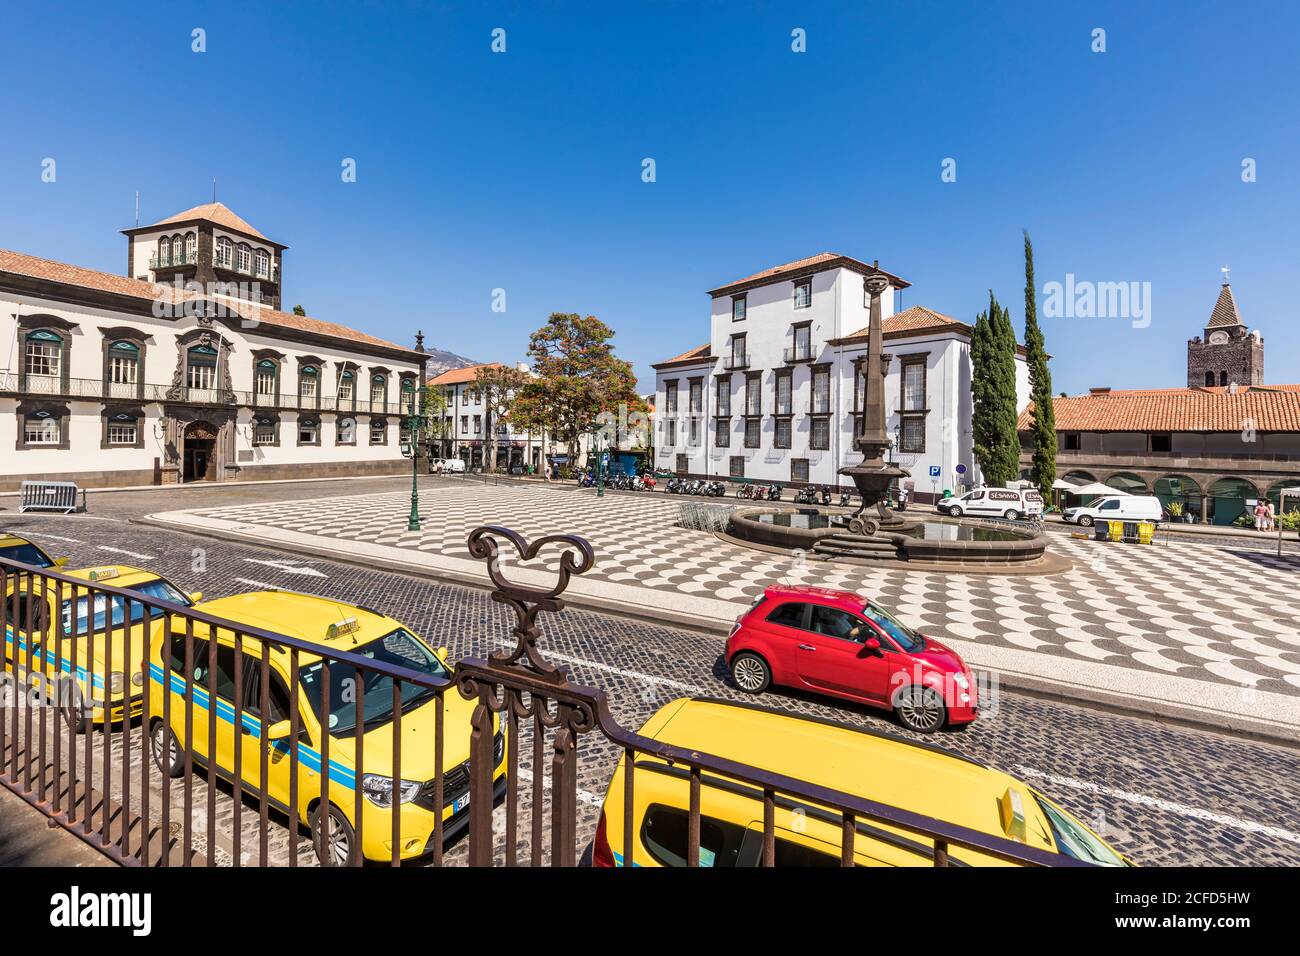 Portugal, Madeira island, Funchal, old town, Praca do Municipio, town hall square, town hall, university, episcopal palace Stock Photo